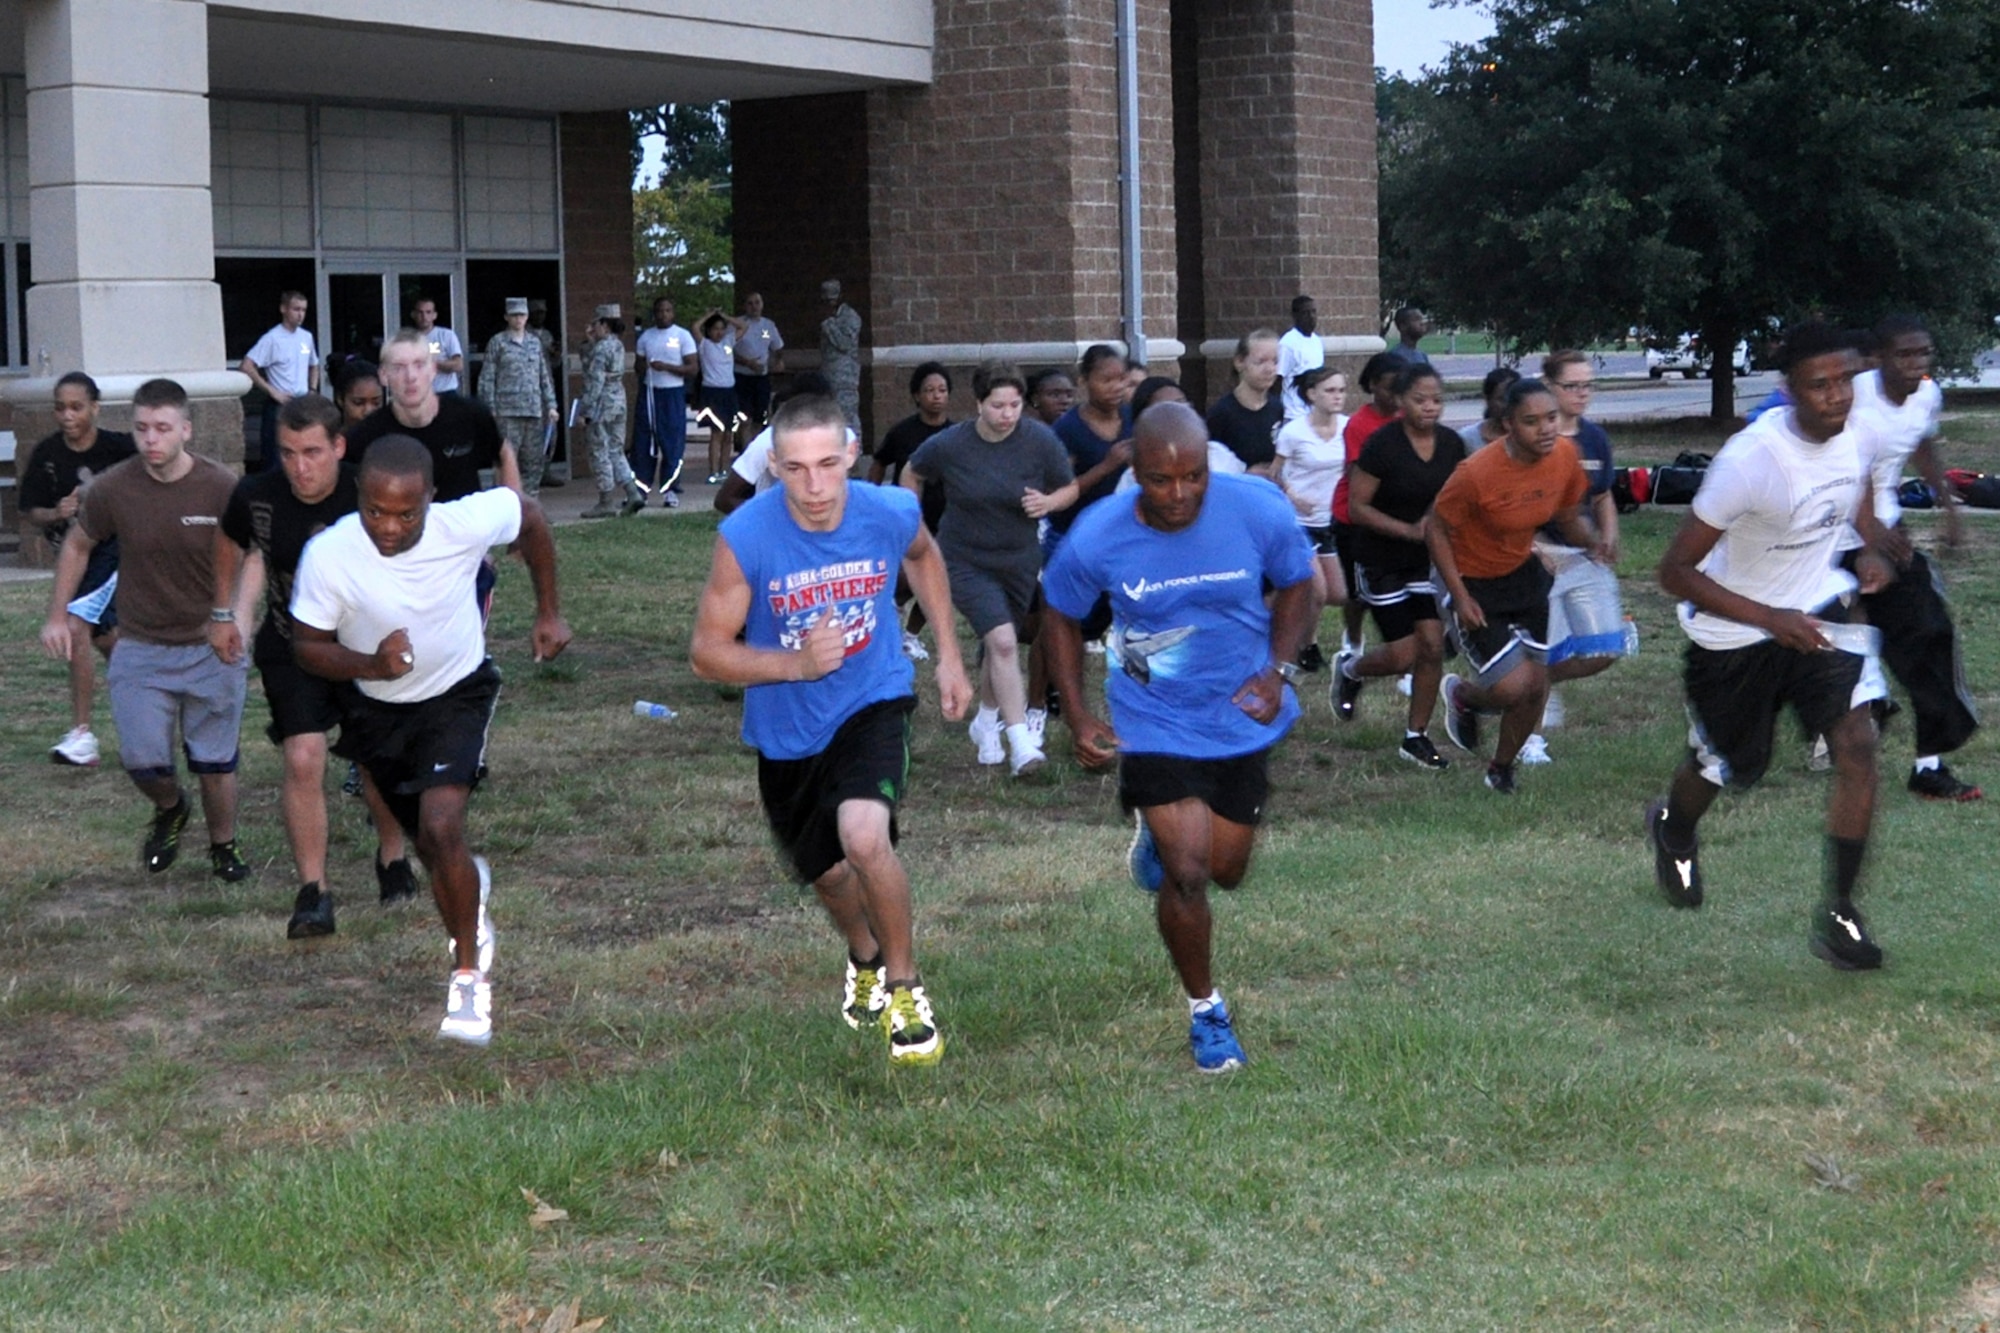 Trainees with the 307th Development and Training Flight head out for a run during the Unit Training Assembly at Barksdale Air Force Base, La., July 8, 2012.  In order to prepare for the rigors of Basic Military Training, trainees begin each morning of the UTA with an intensive block of instruction on physical fitness and training. (U.S. Air Force photo by Staff Sgt. Ted Daigle/Released)